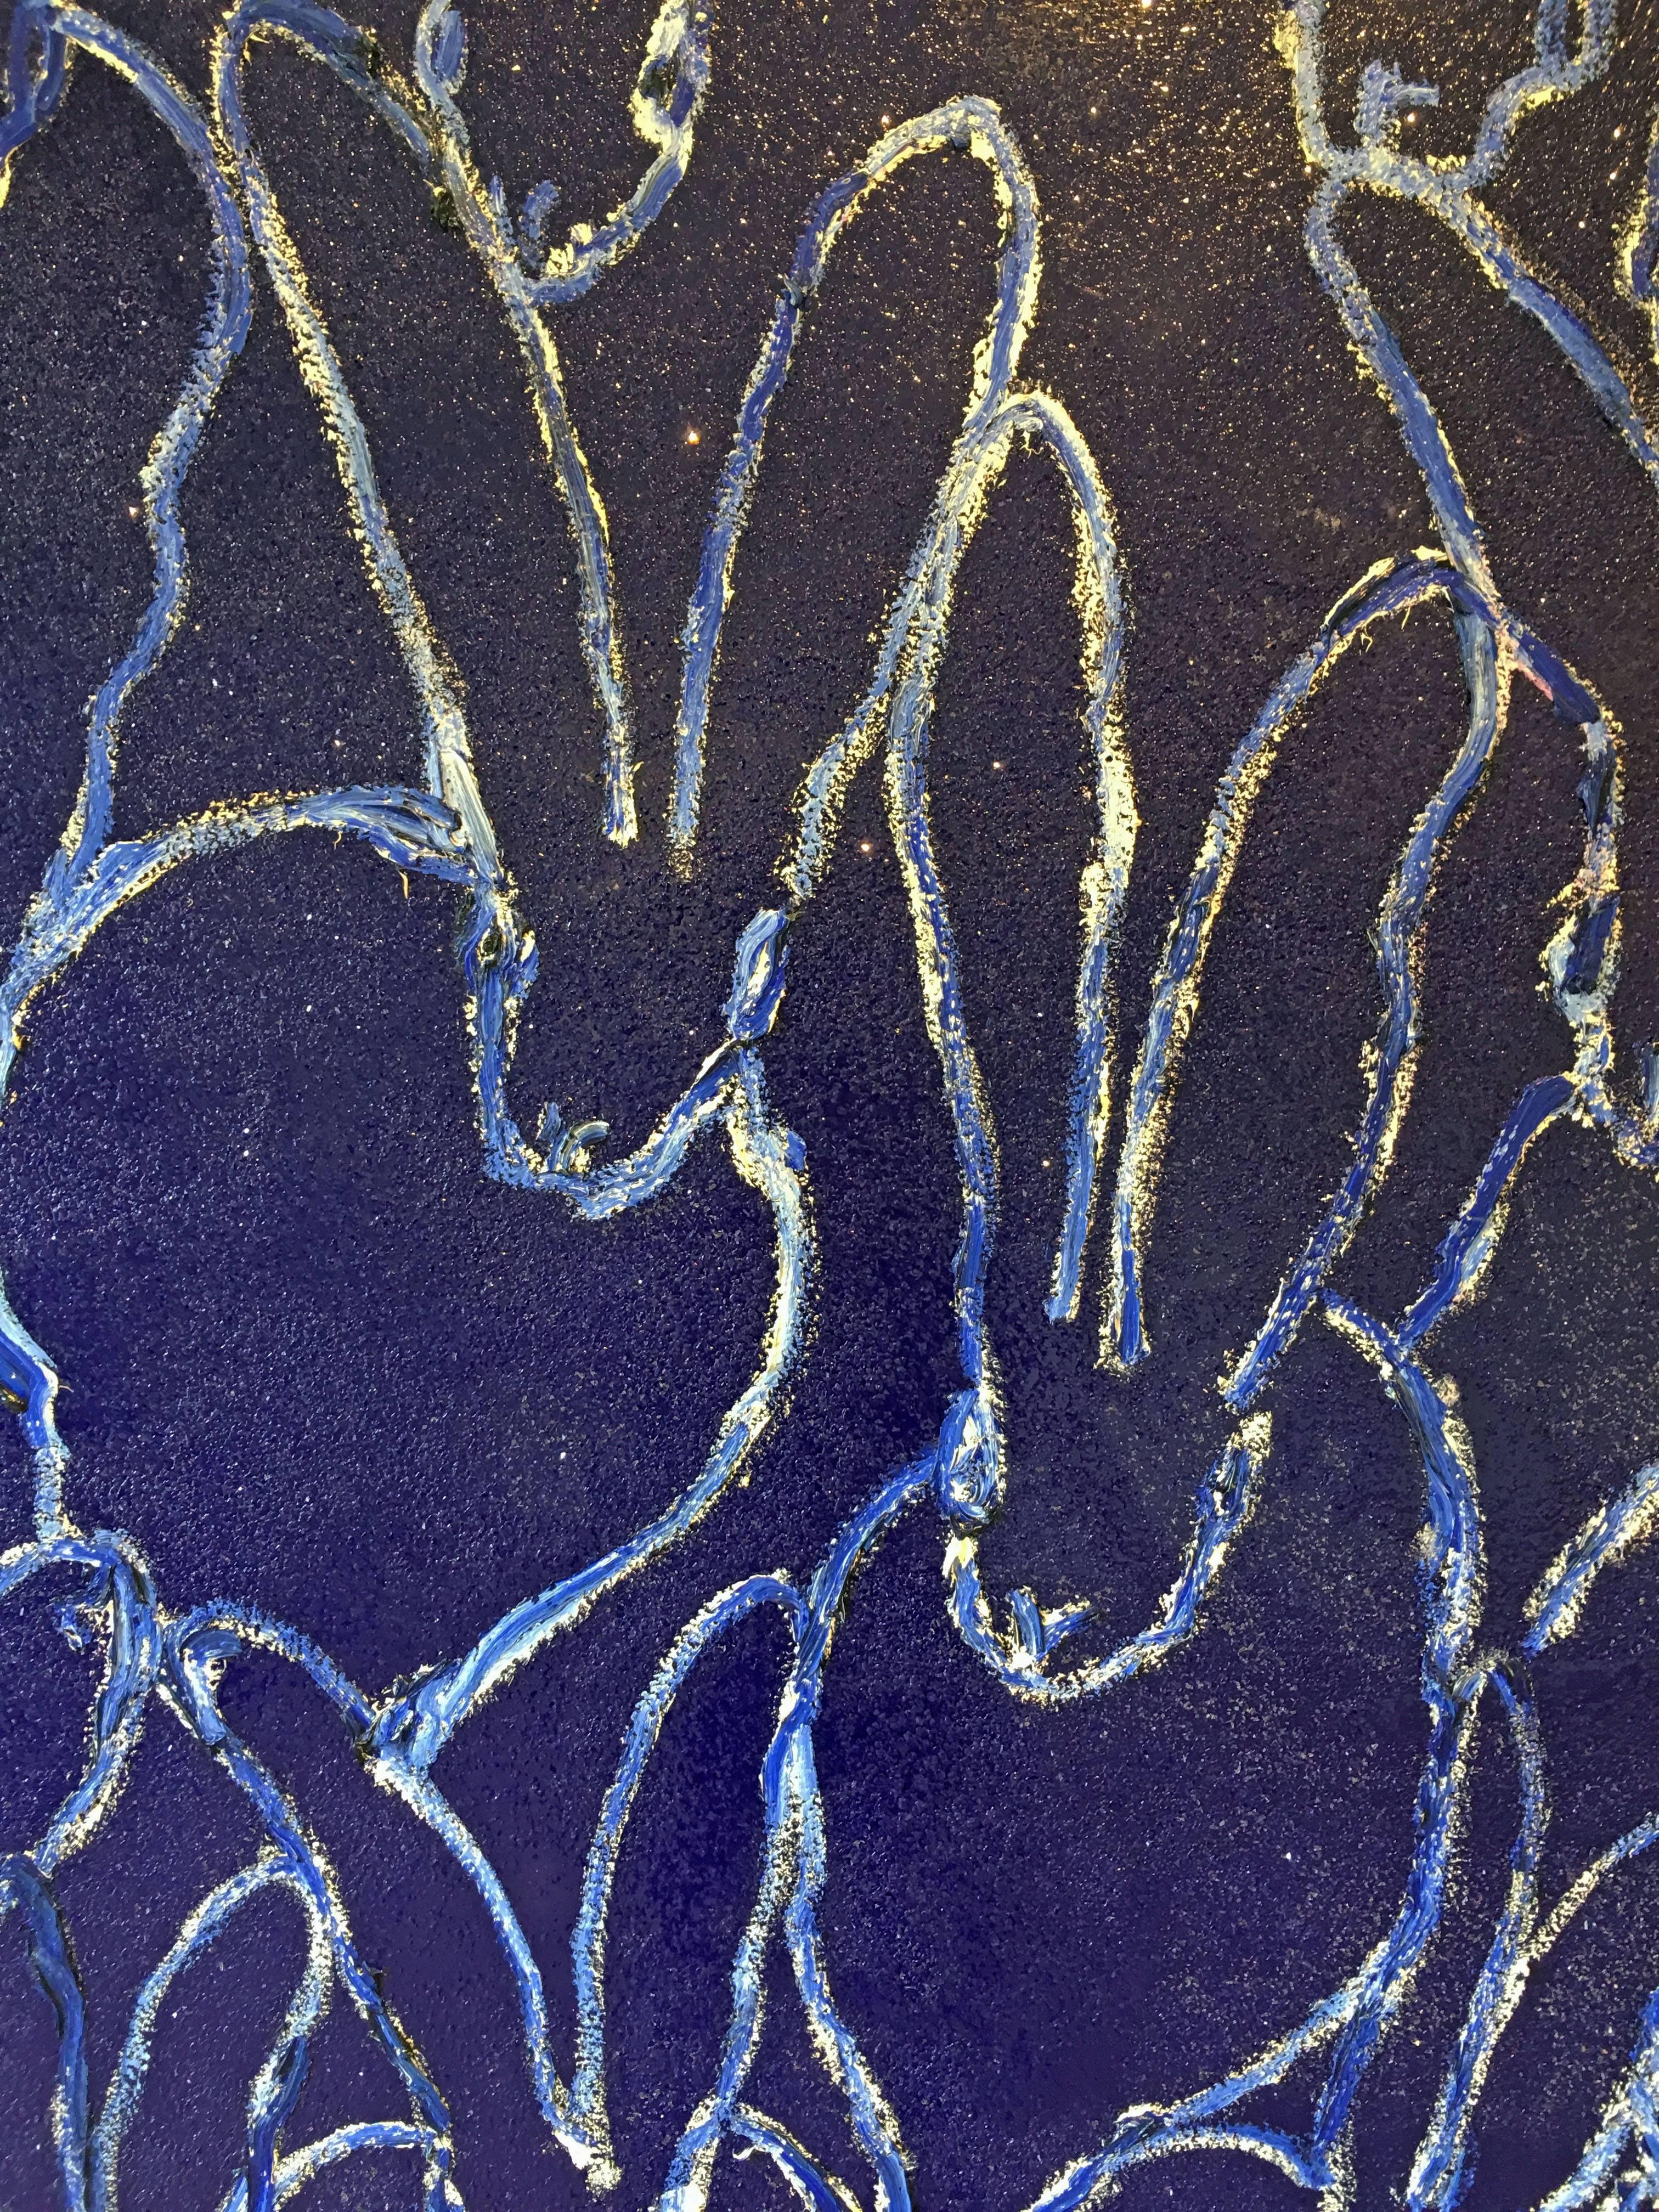 'Untitled,' 2016 by renowned New York City artist, Hunt Slonem. Oil, acrylic, and diamond dust on canvas, 48 x 52 inches. This royal blue painting features a 'fluffle' of bunnies outlined in white. The diamond dust incorporated into Slonem's